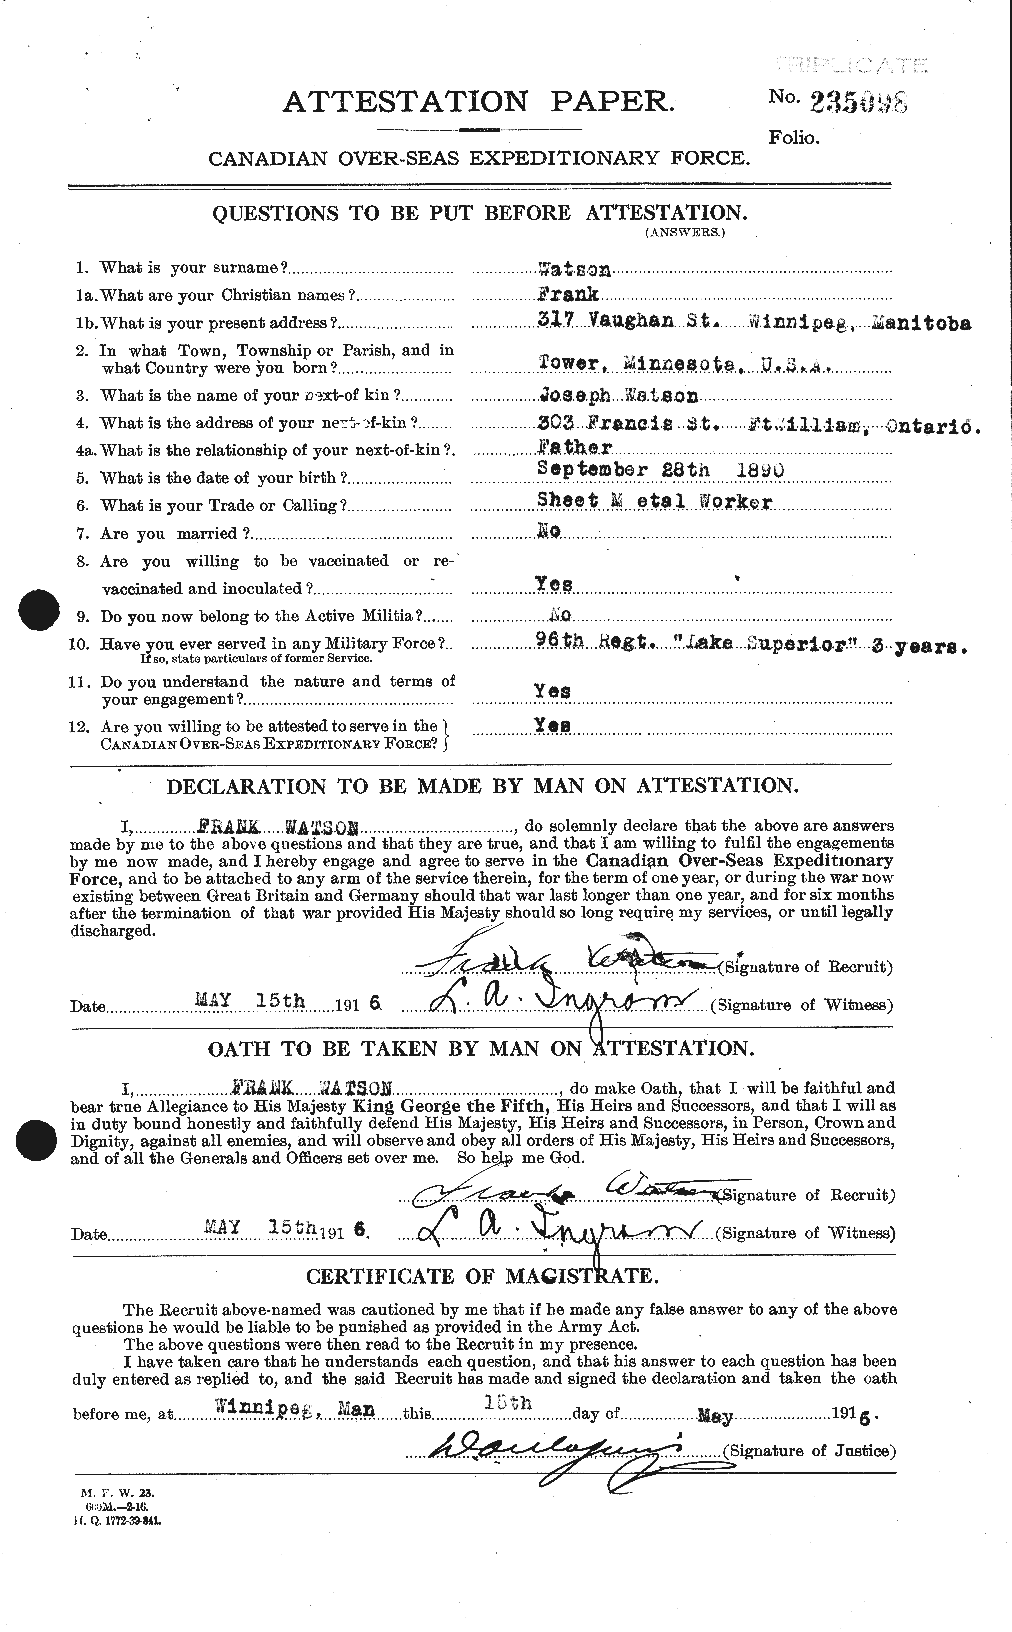 Personnel Records of the First World War - CEF 656696a